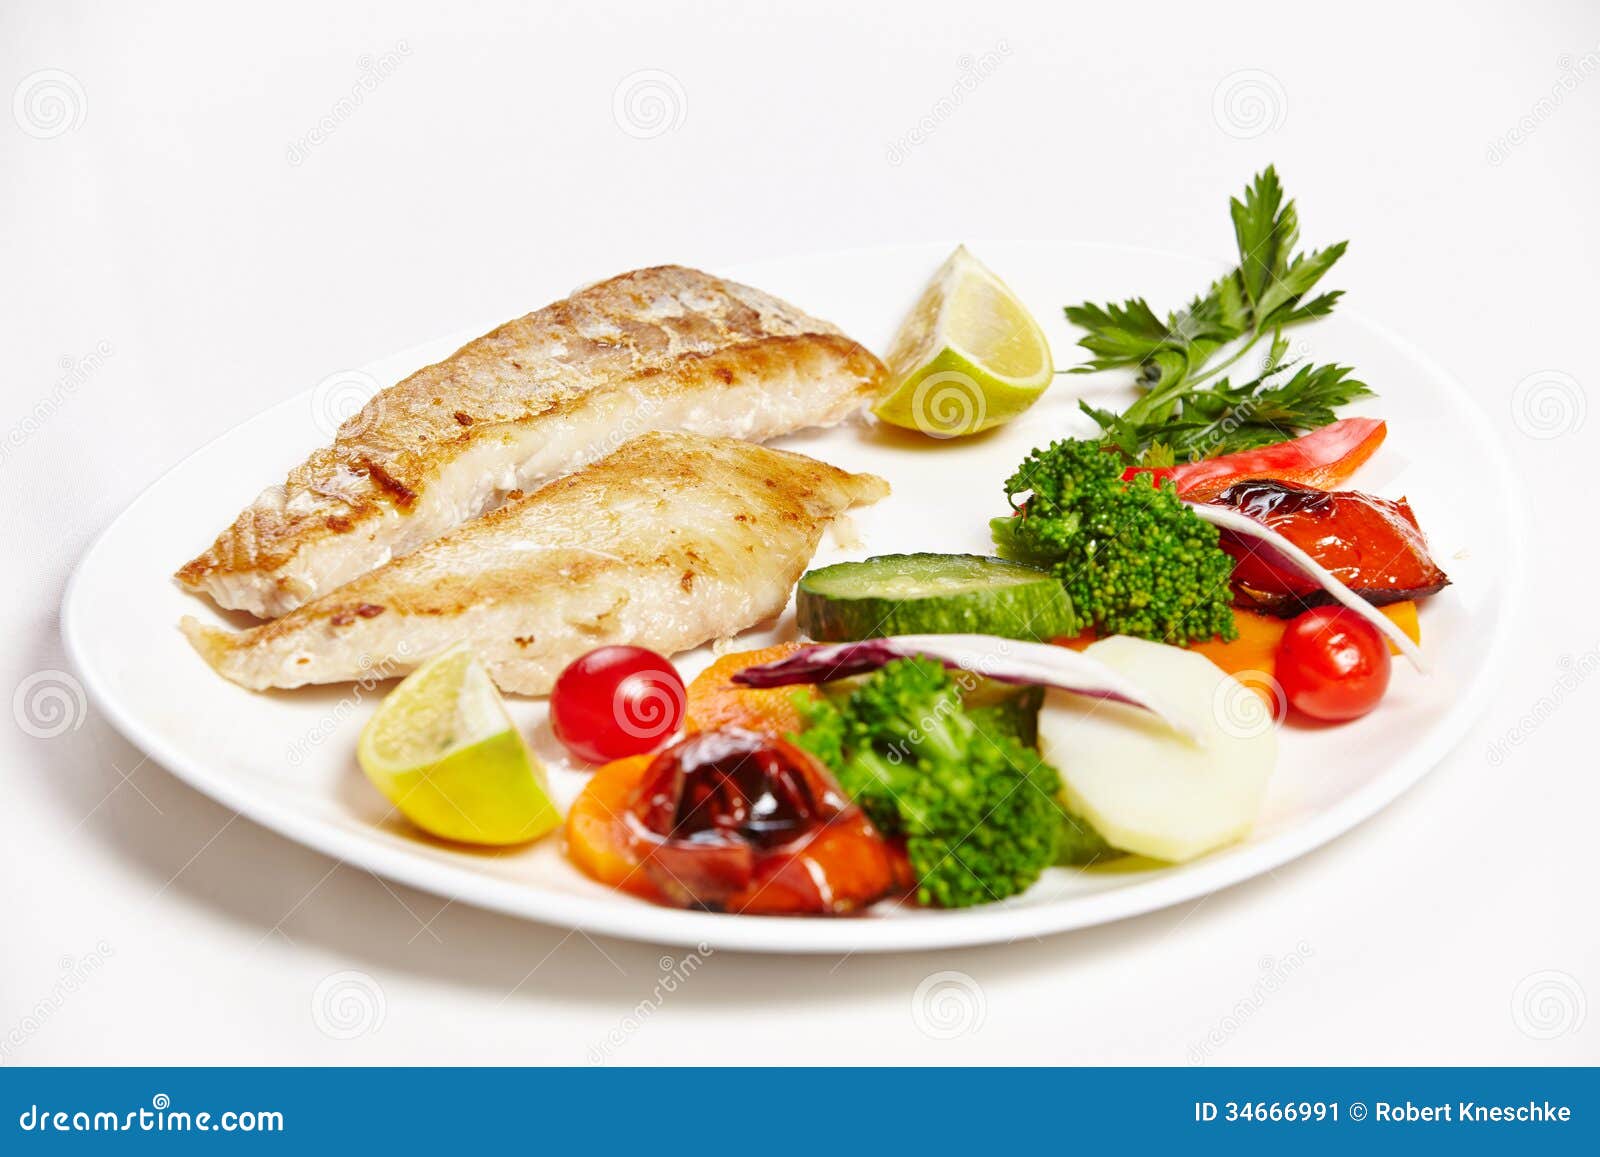 Hake Filet Grille with Steamed Stock Image - Image of vegetables, fish ...